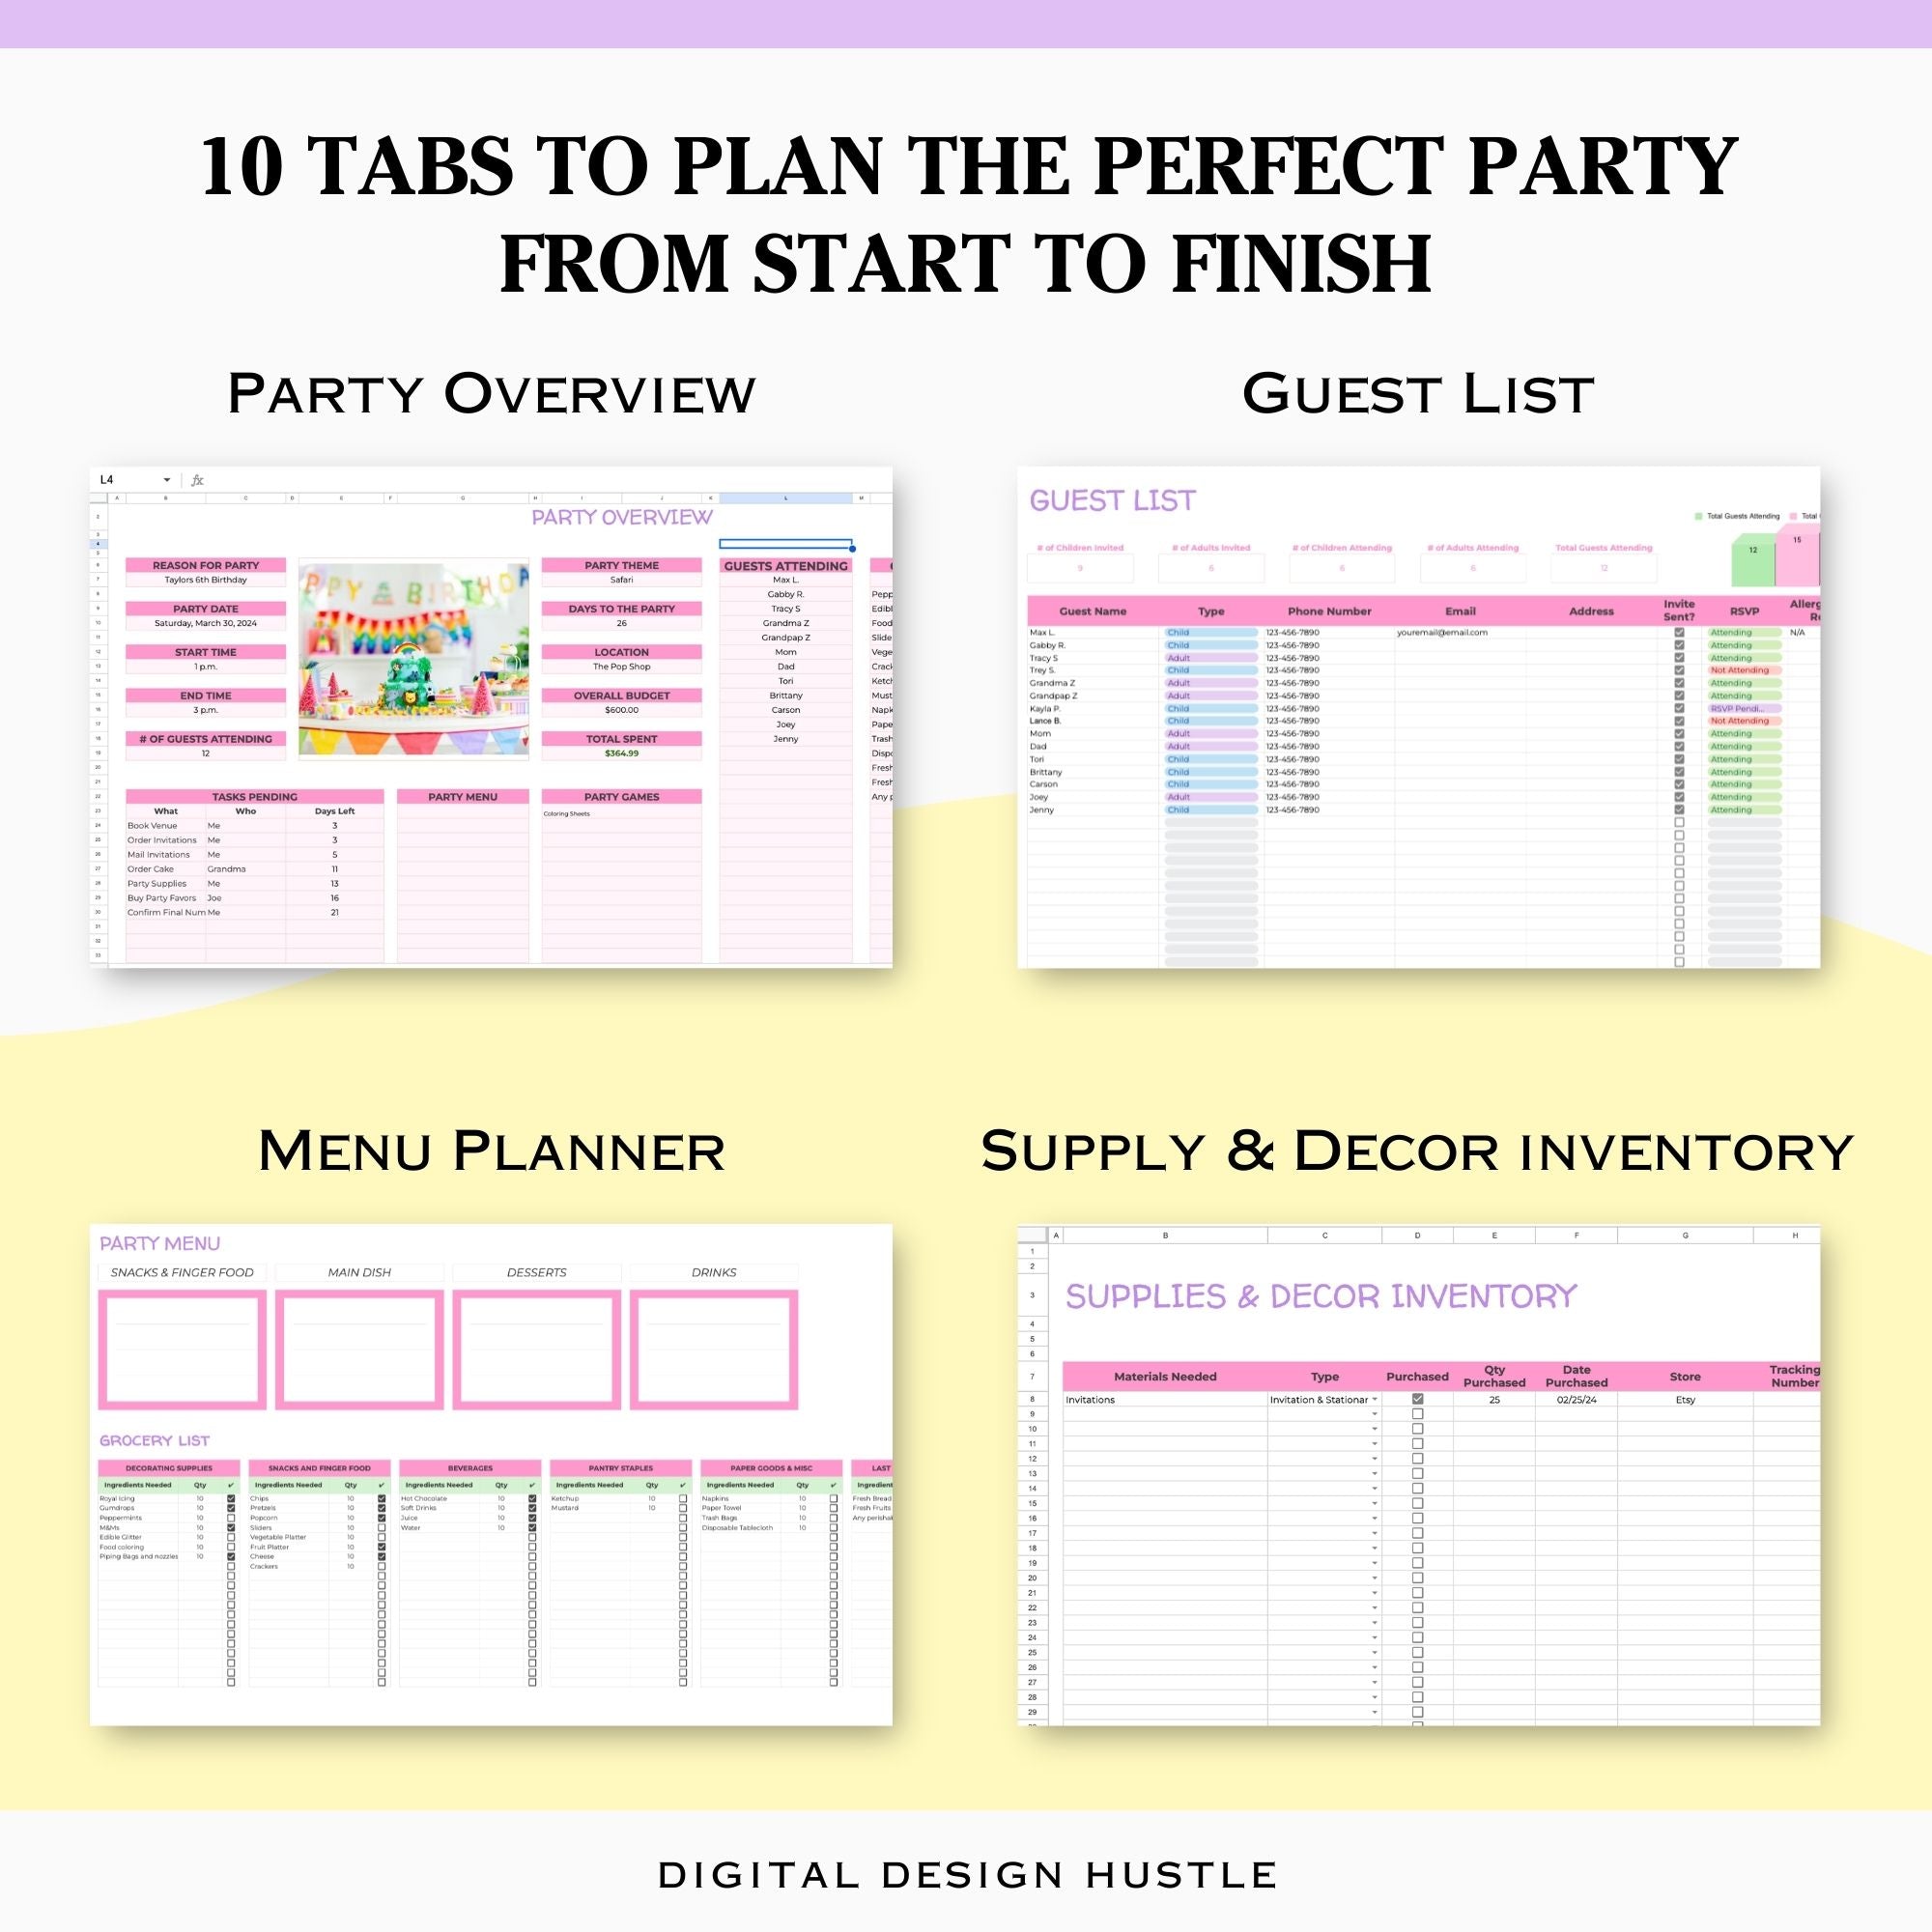 Plan the perfect party effortlessly with our Birthday Party Planning Spreadsheet designed specifically for Google Sheets! This comprehensive Digital Event Planner includes 10 meticulously organized tabs, each tailored to streamline every aspect of your event preparation.